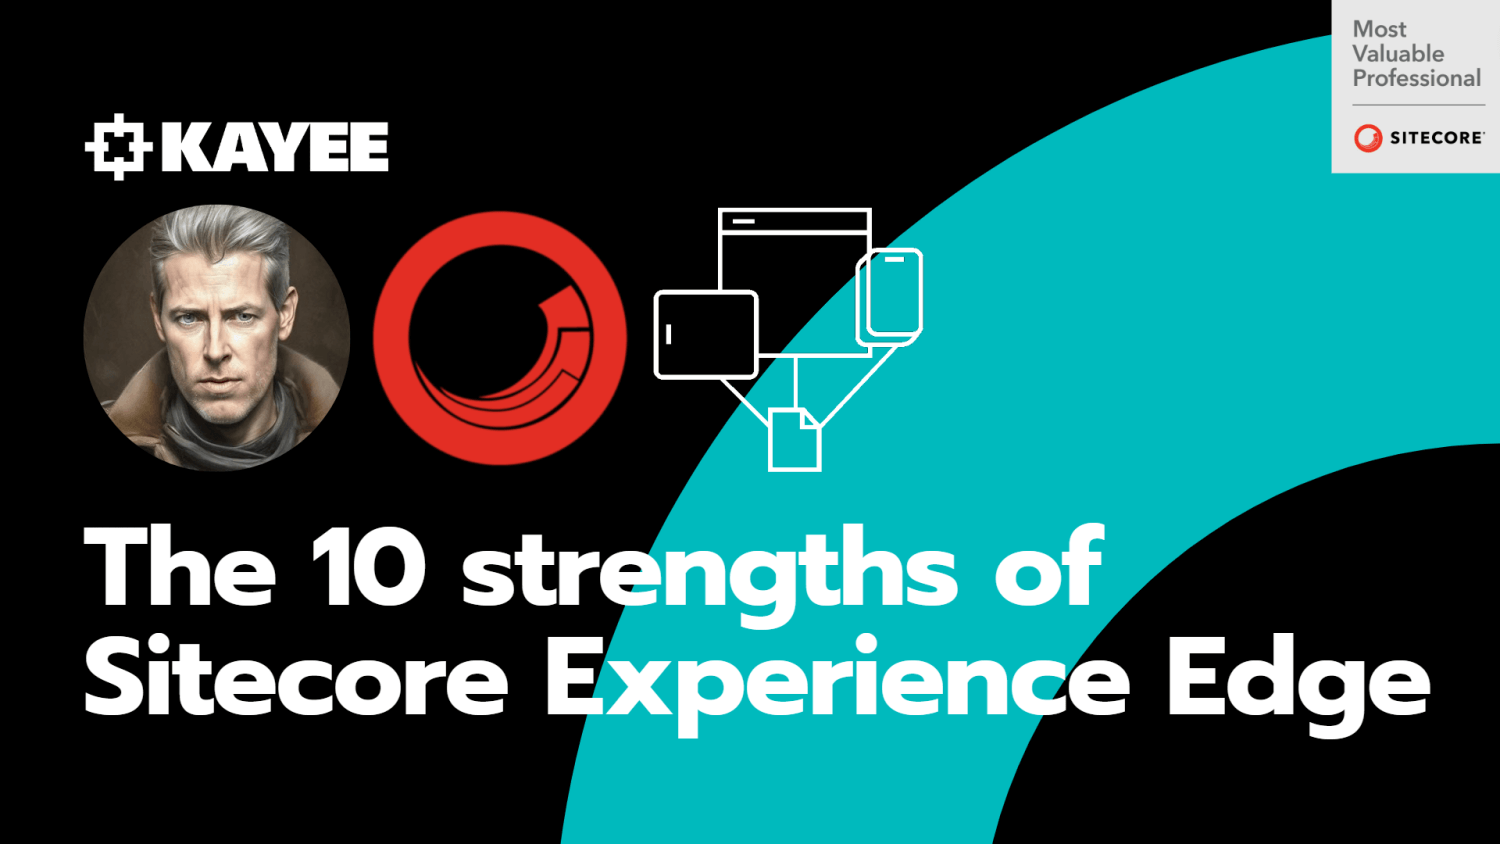 The 10 strengths of Sitecore Experience Edge